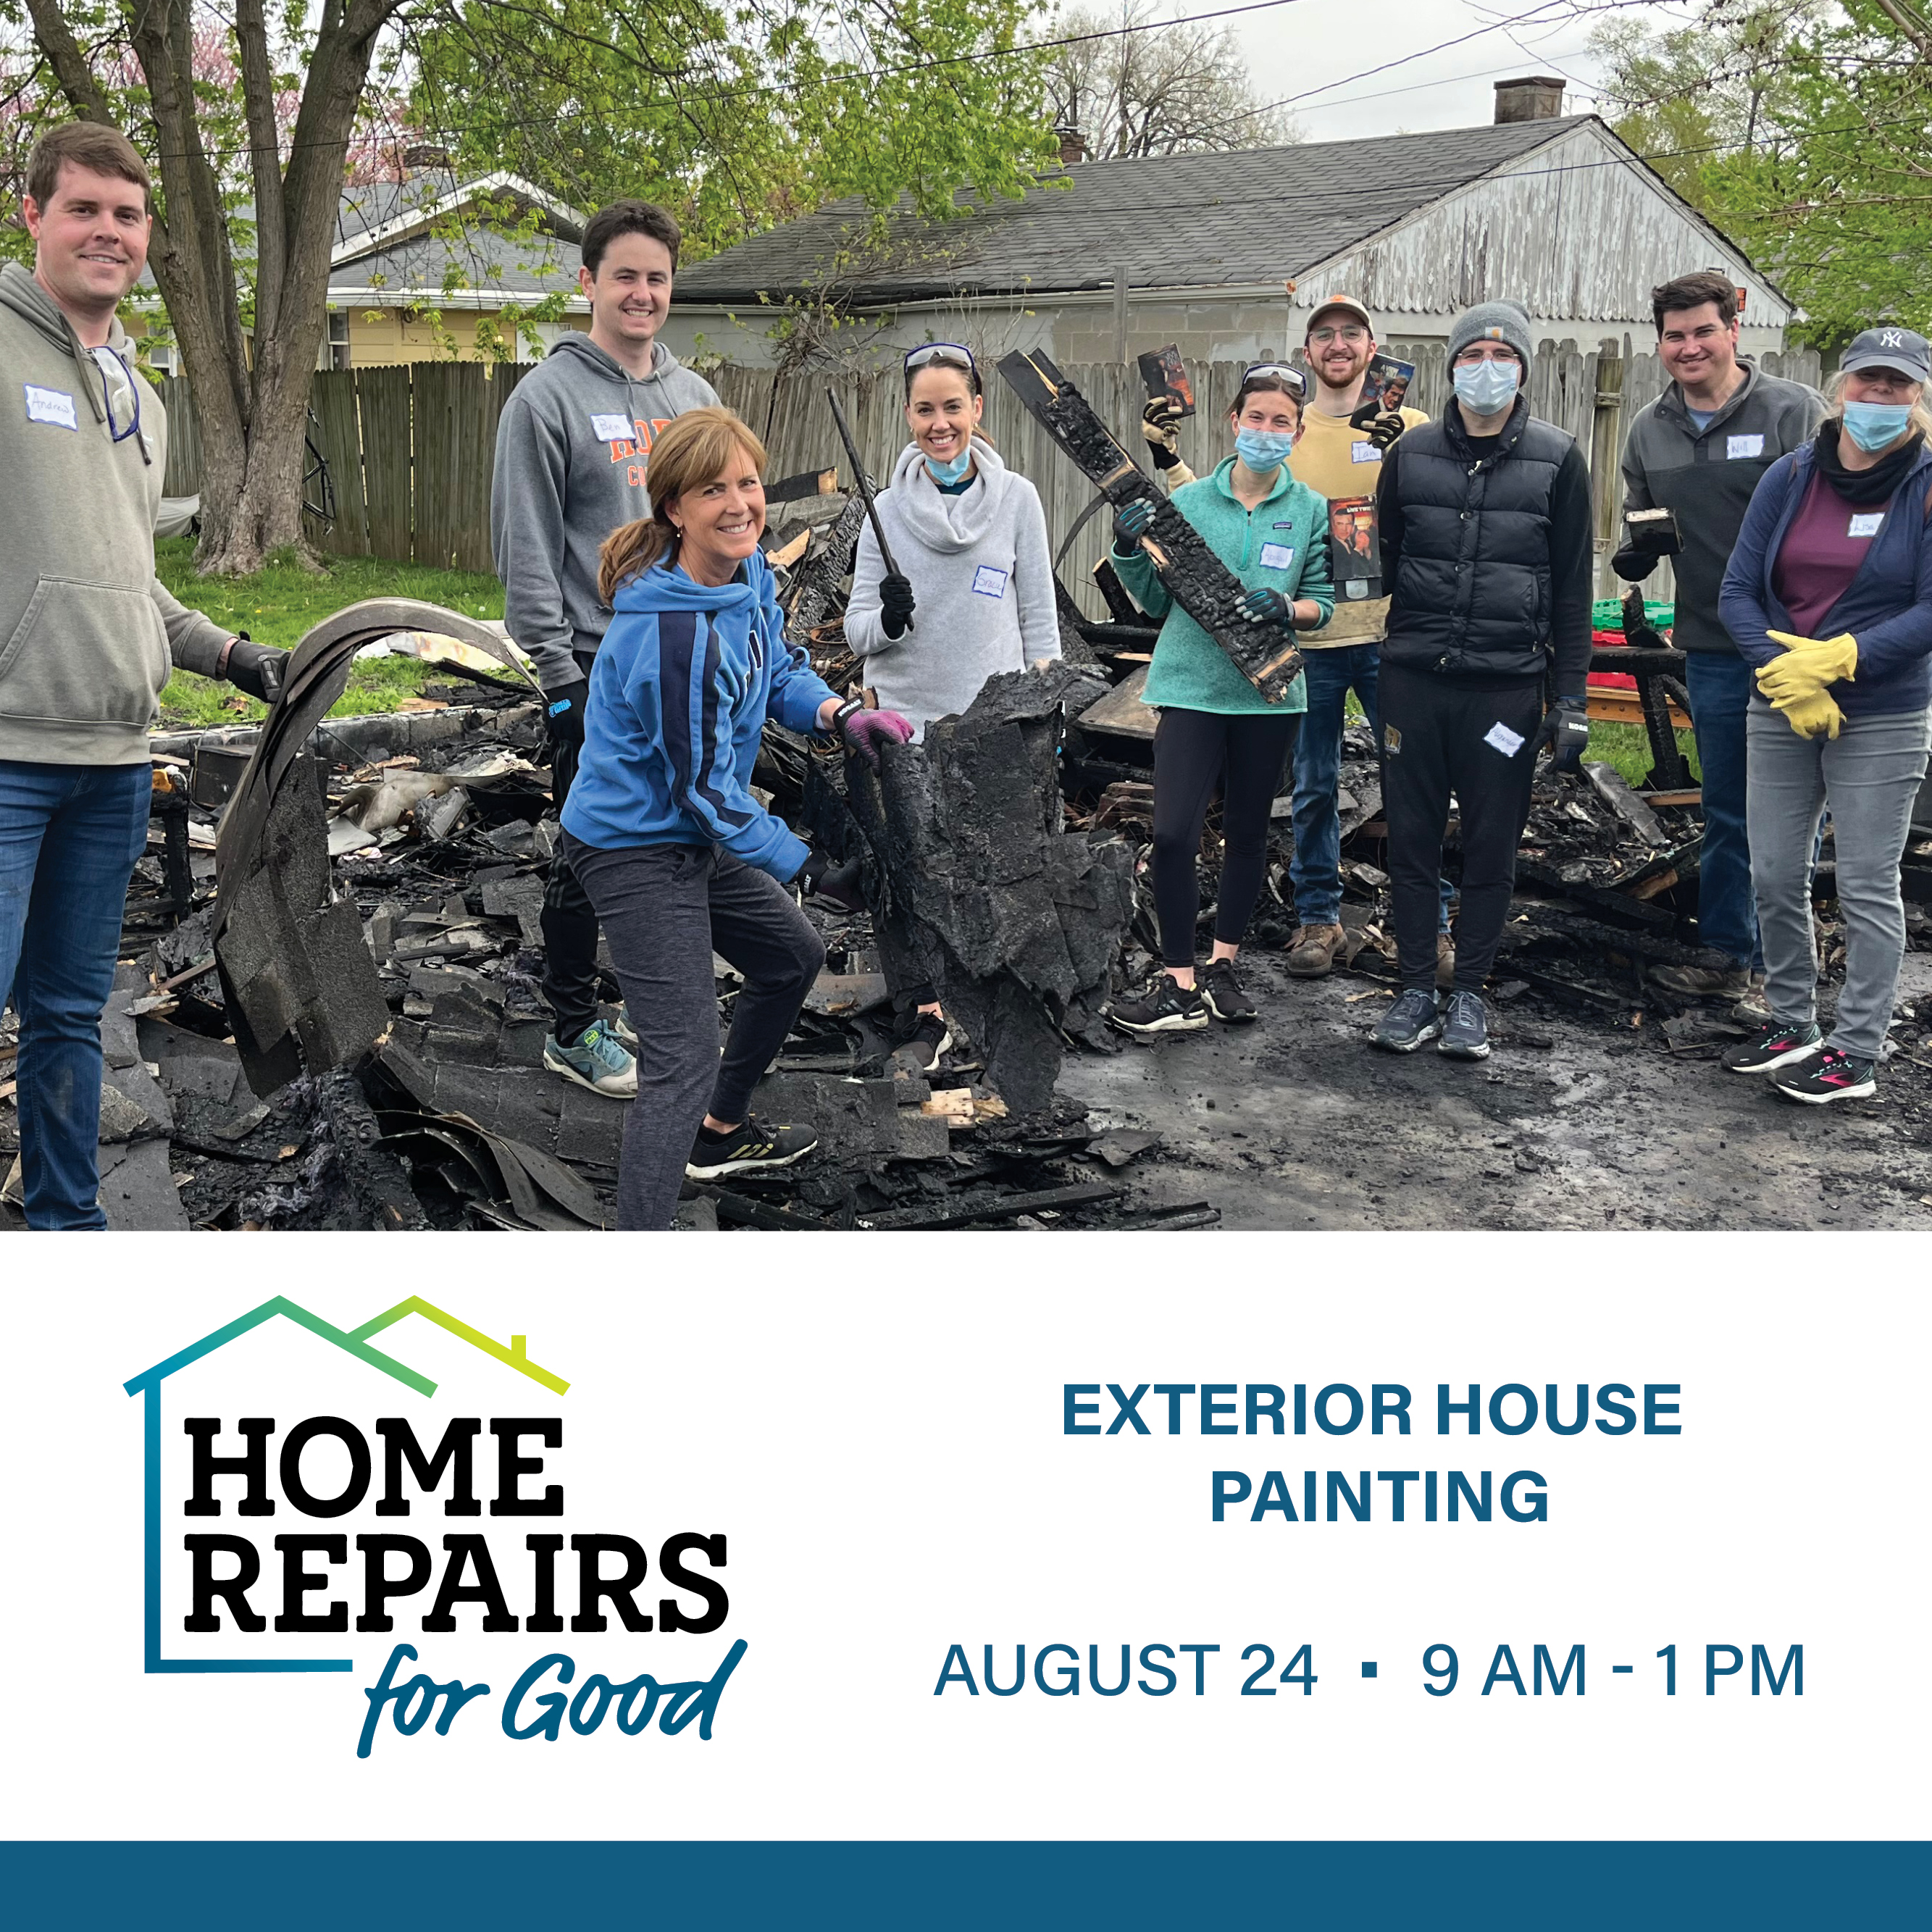 Home Repairs for Good
Exterior House Painting
August 24, 9 AM - 1 PM, Forest Manor Neighborhood
Help us paint a house for a homeowner in need.


